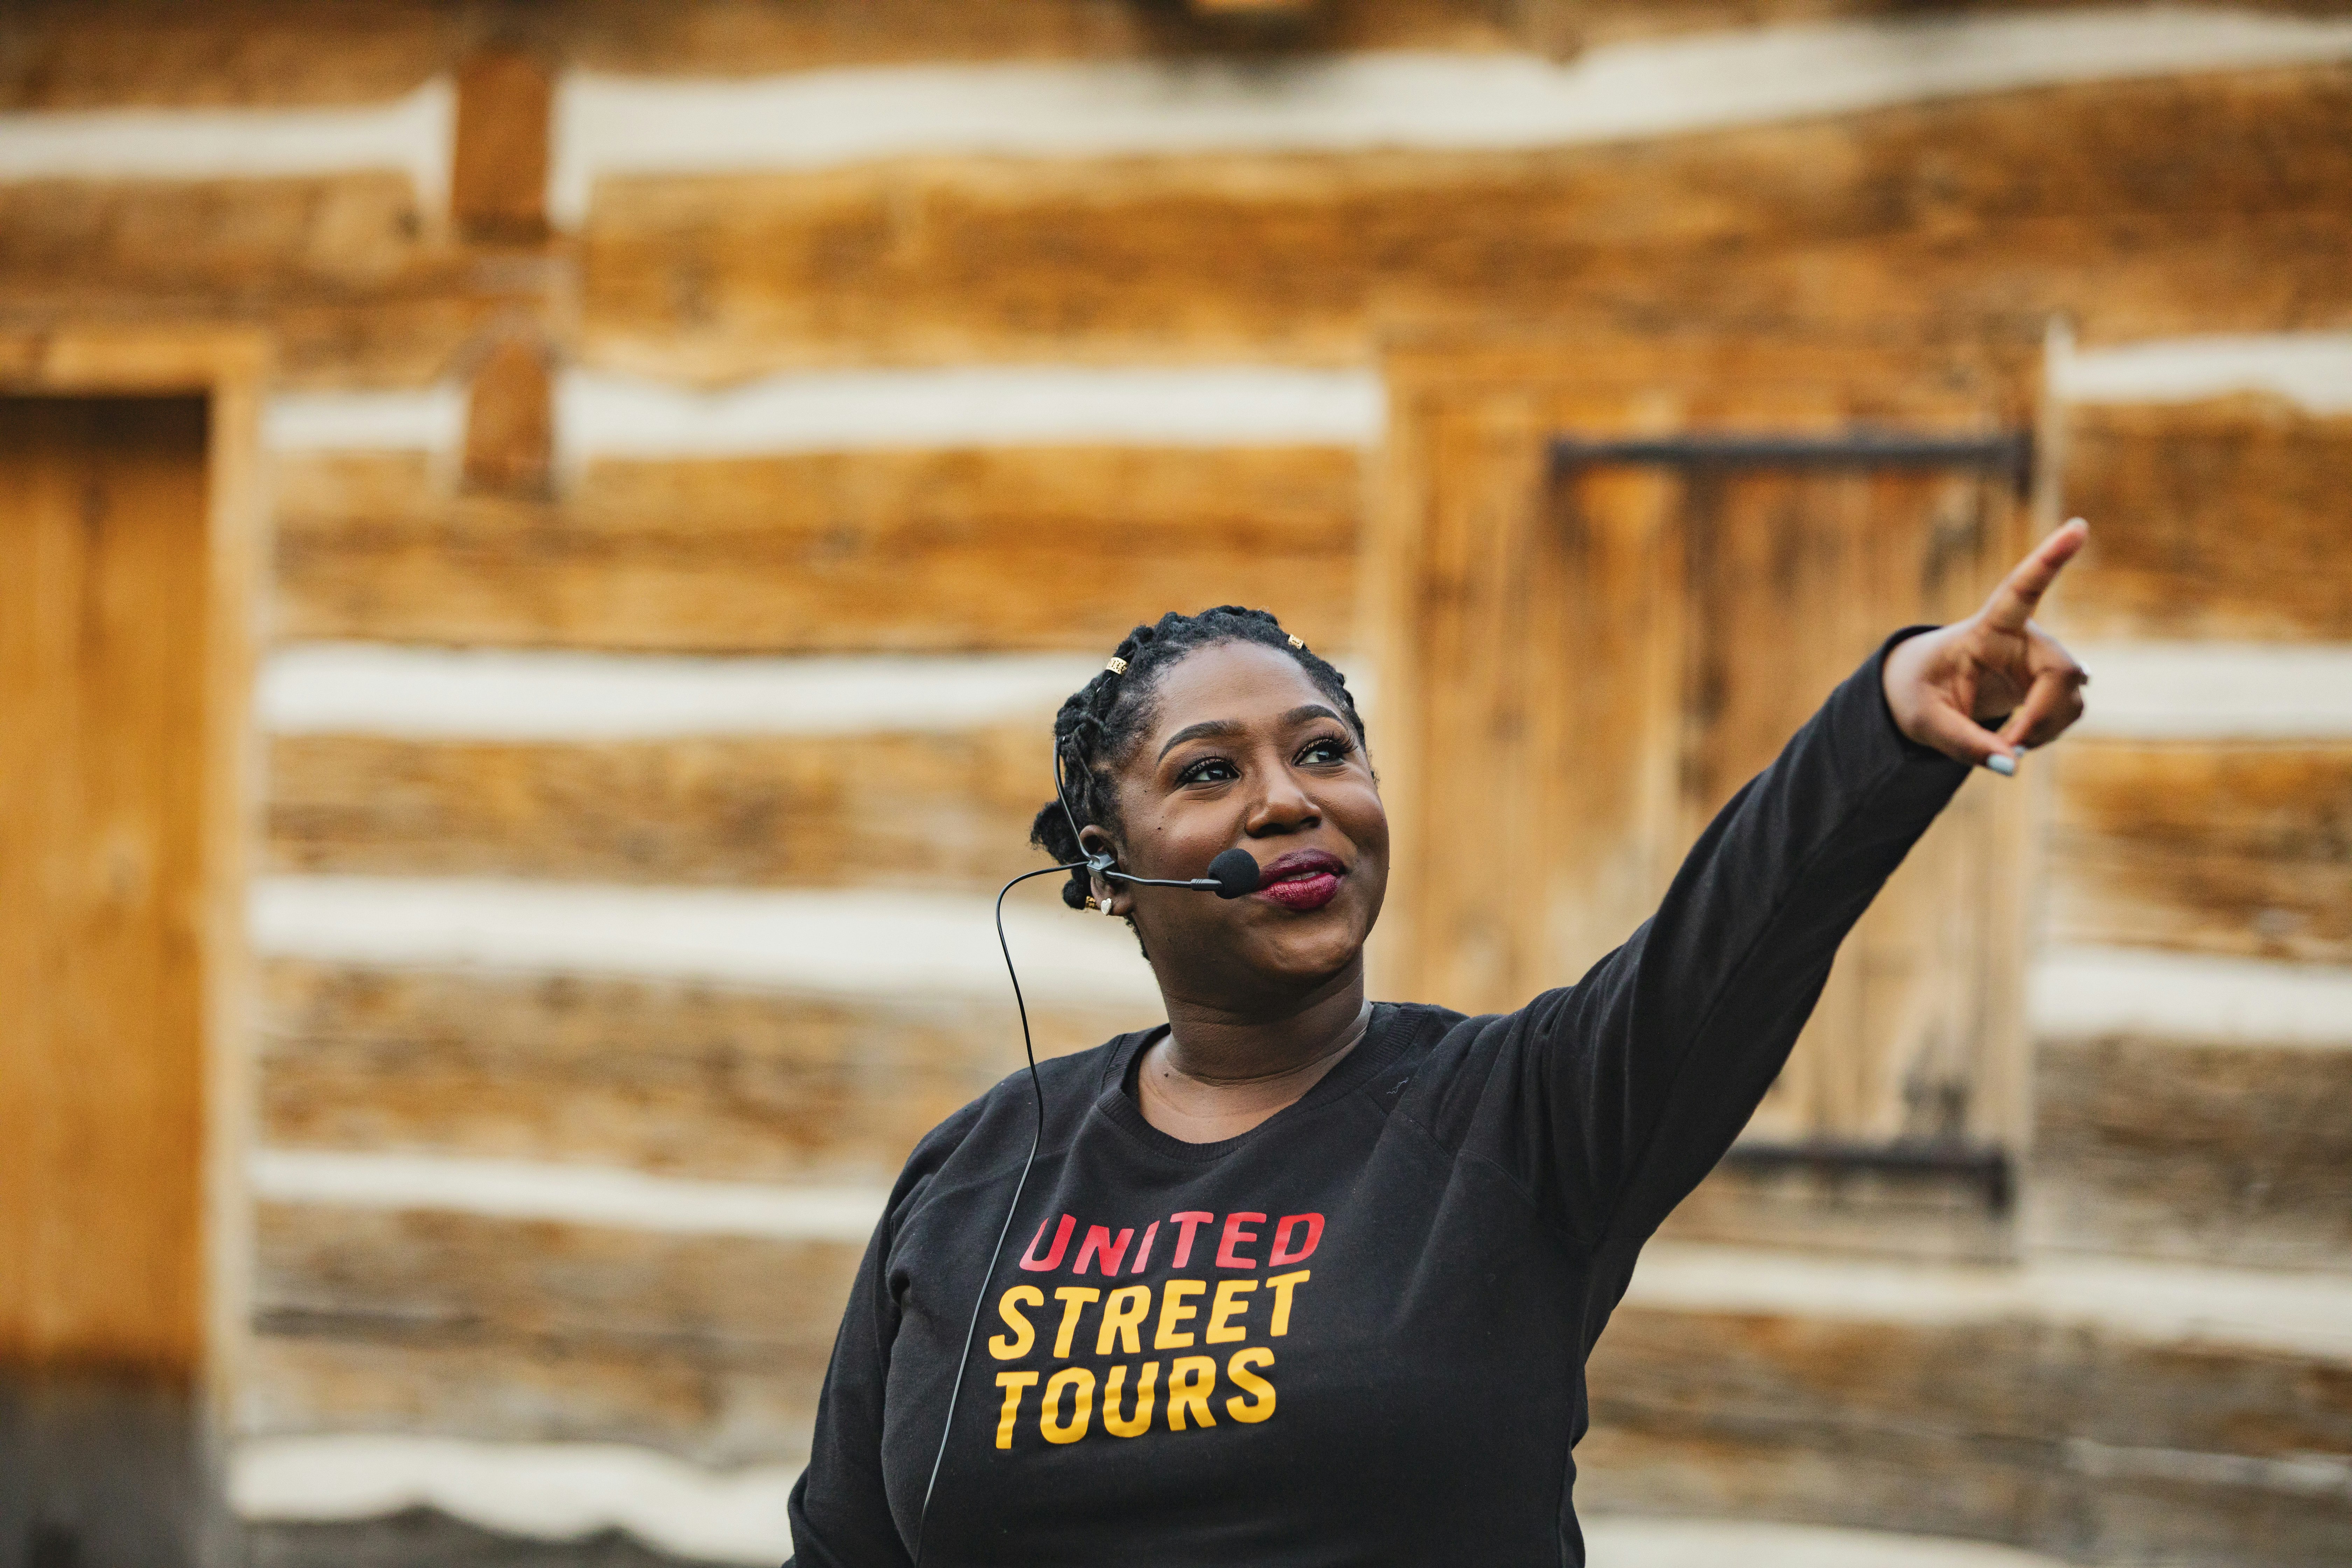 A woman wearing a head microphone and a black t-shirt that says 'United Street Tours' points to something out of frame.